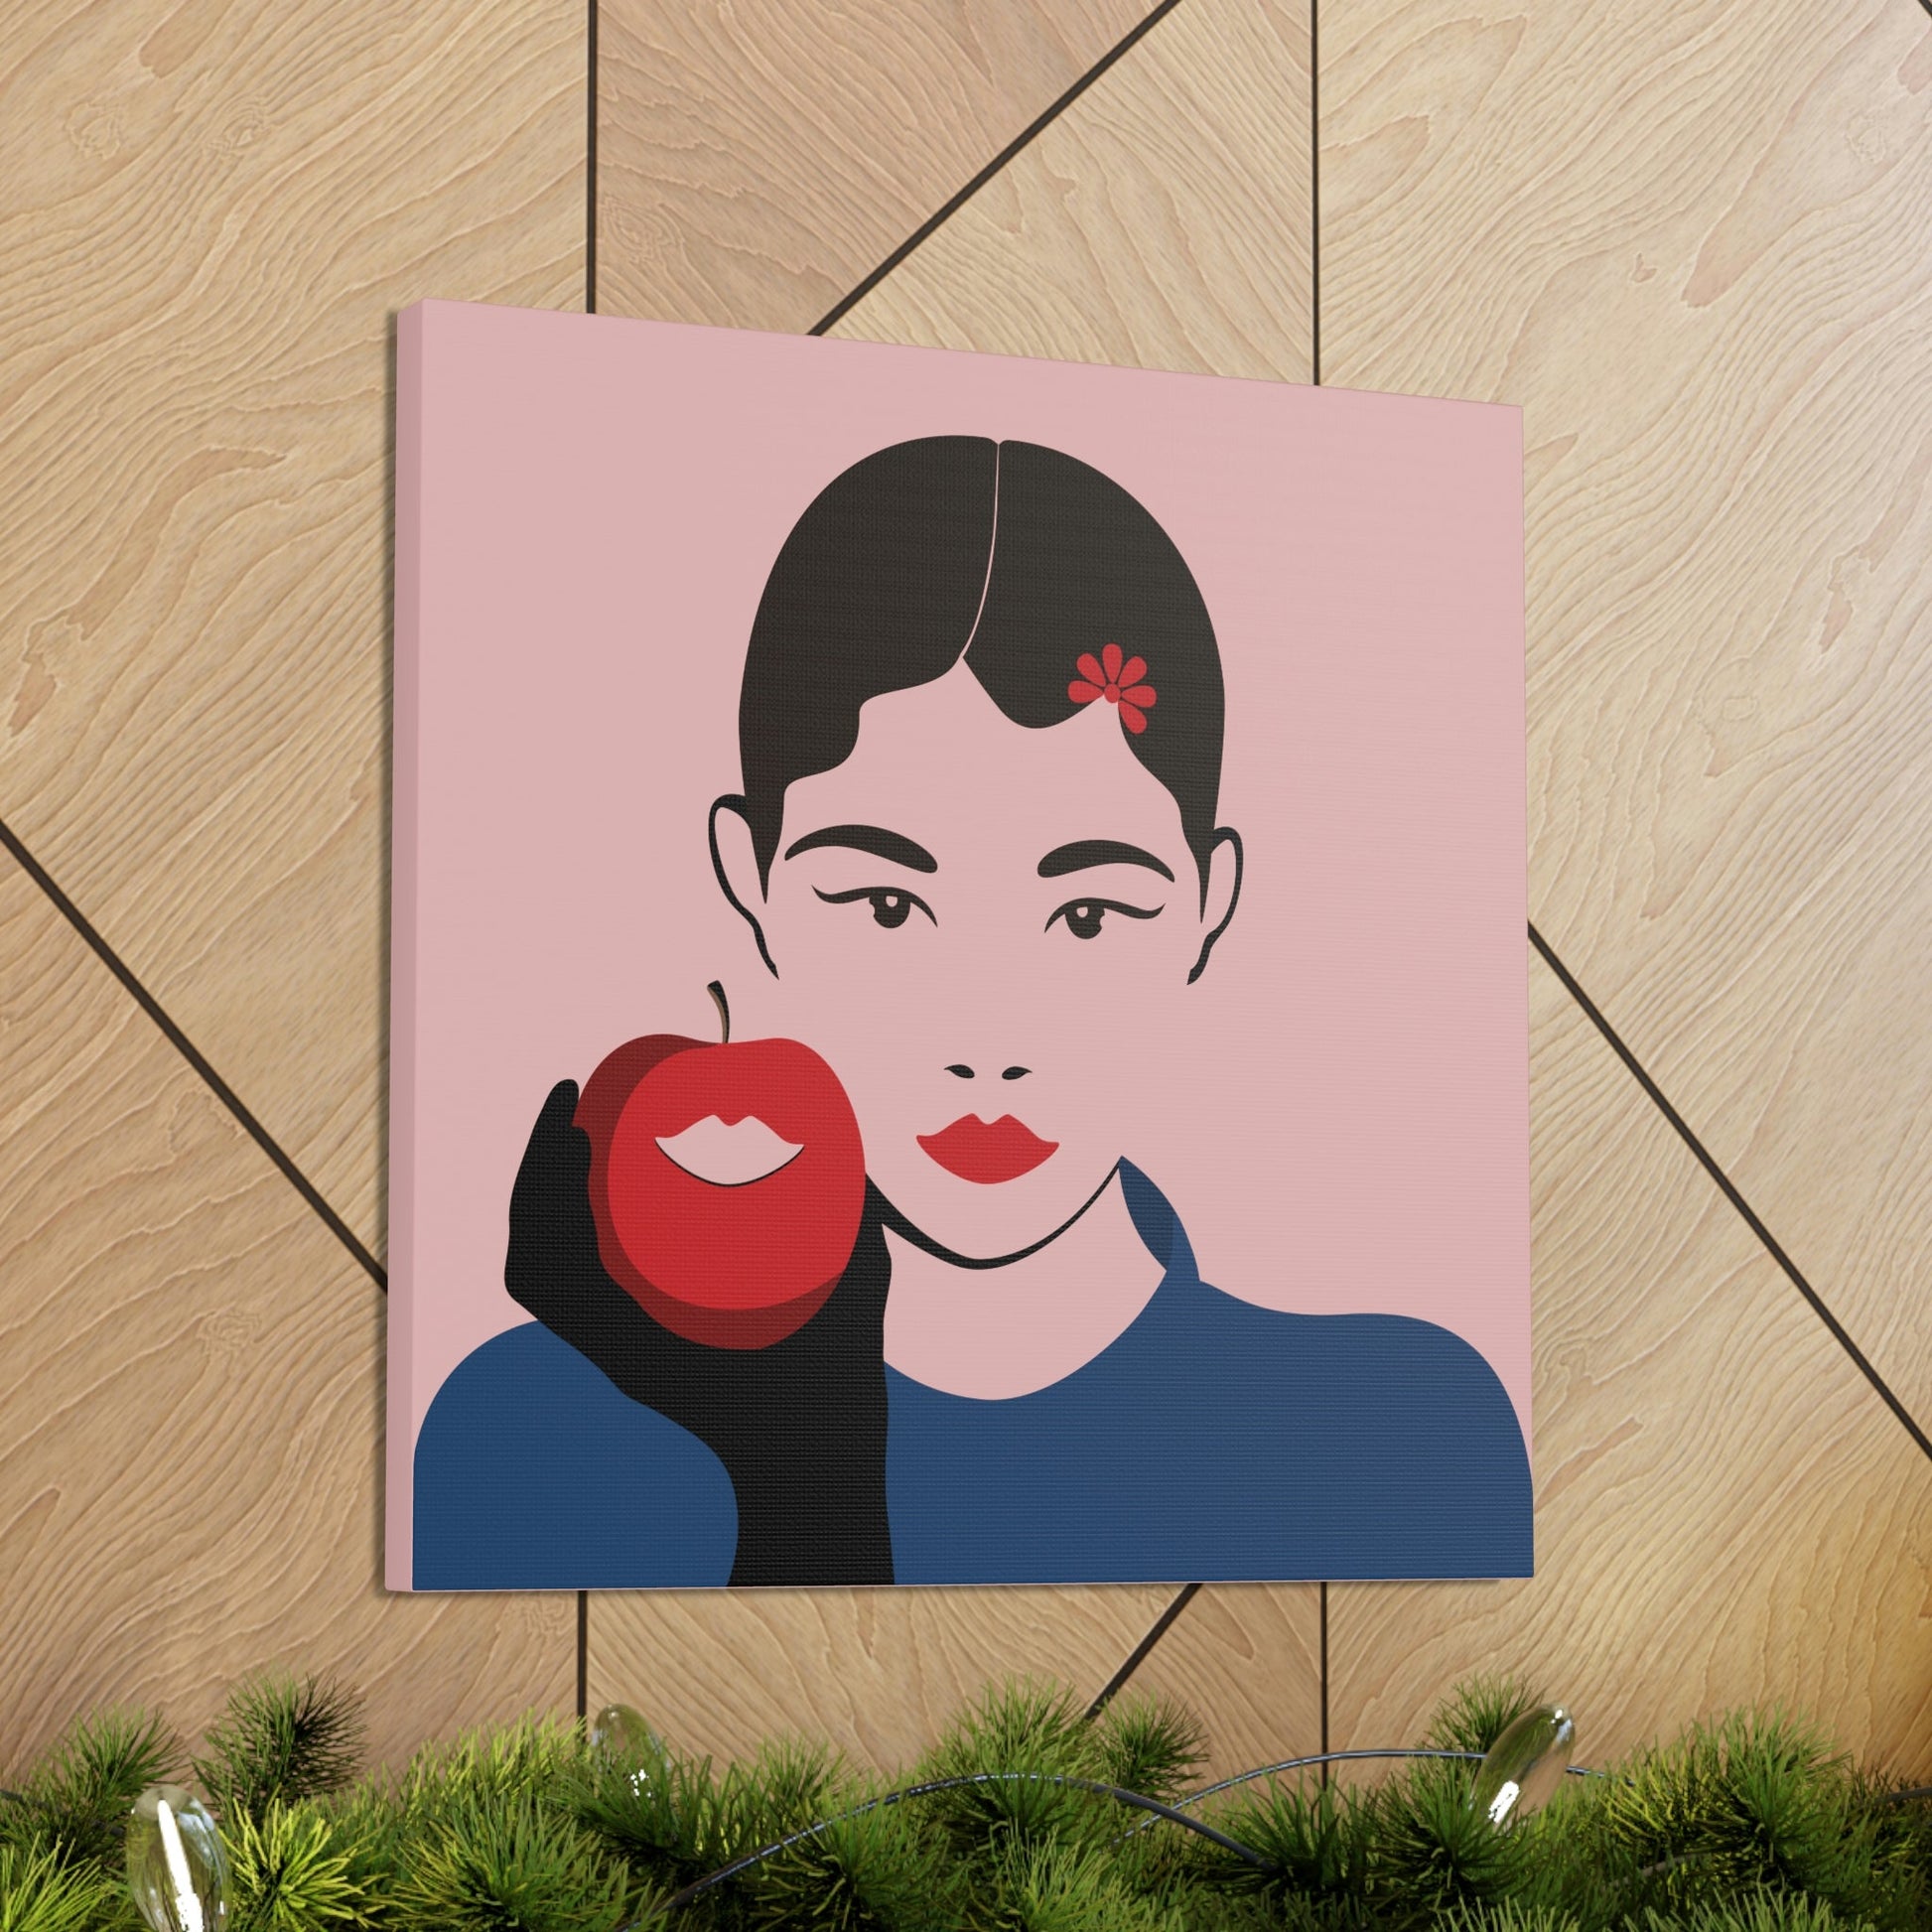 Japan Art Minimal Aesthetic Asian Woman Portrait Style Classic Graphic Canvas Gallery Wraps Ichaku [Perfect Gifts Selection]